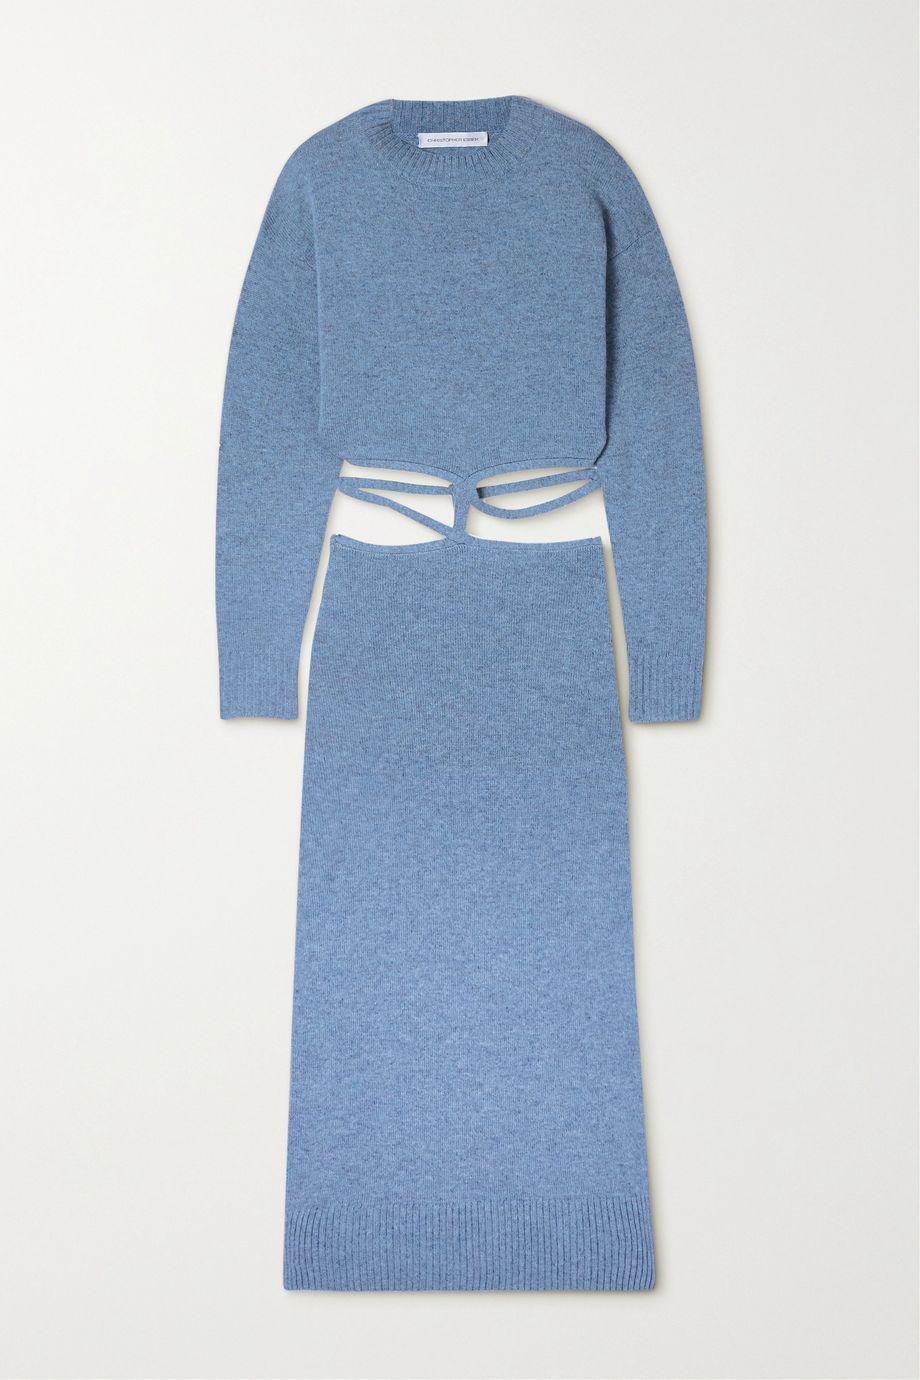 Tie-detailed cutout wool and cashmere-blend midi dress by CHRISTOPHER ESBER